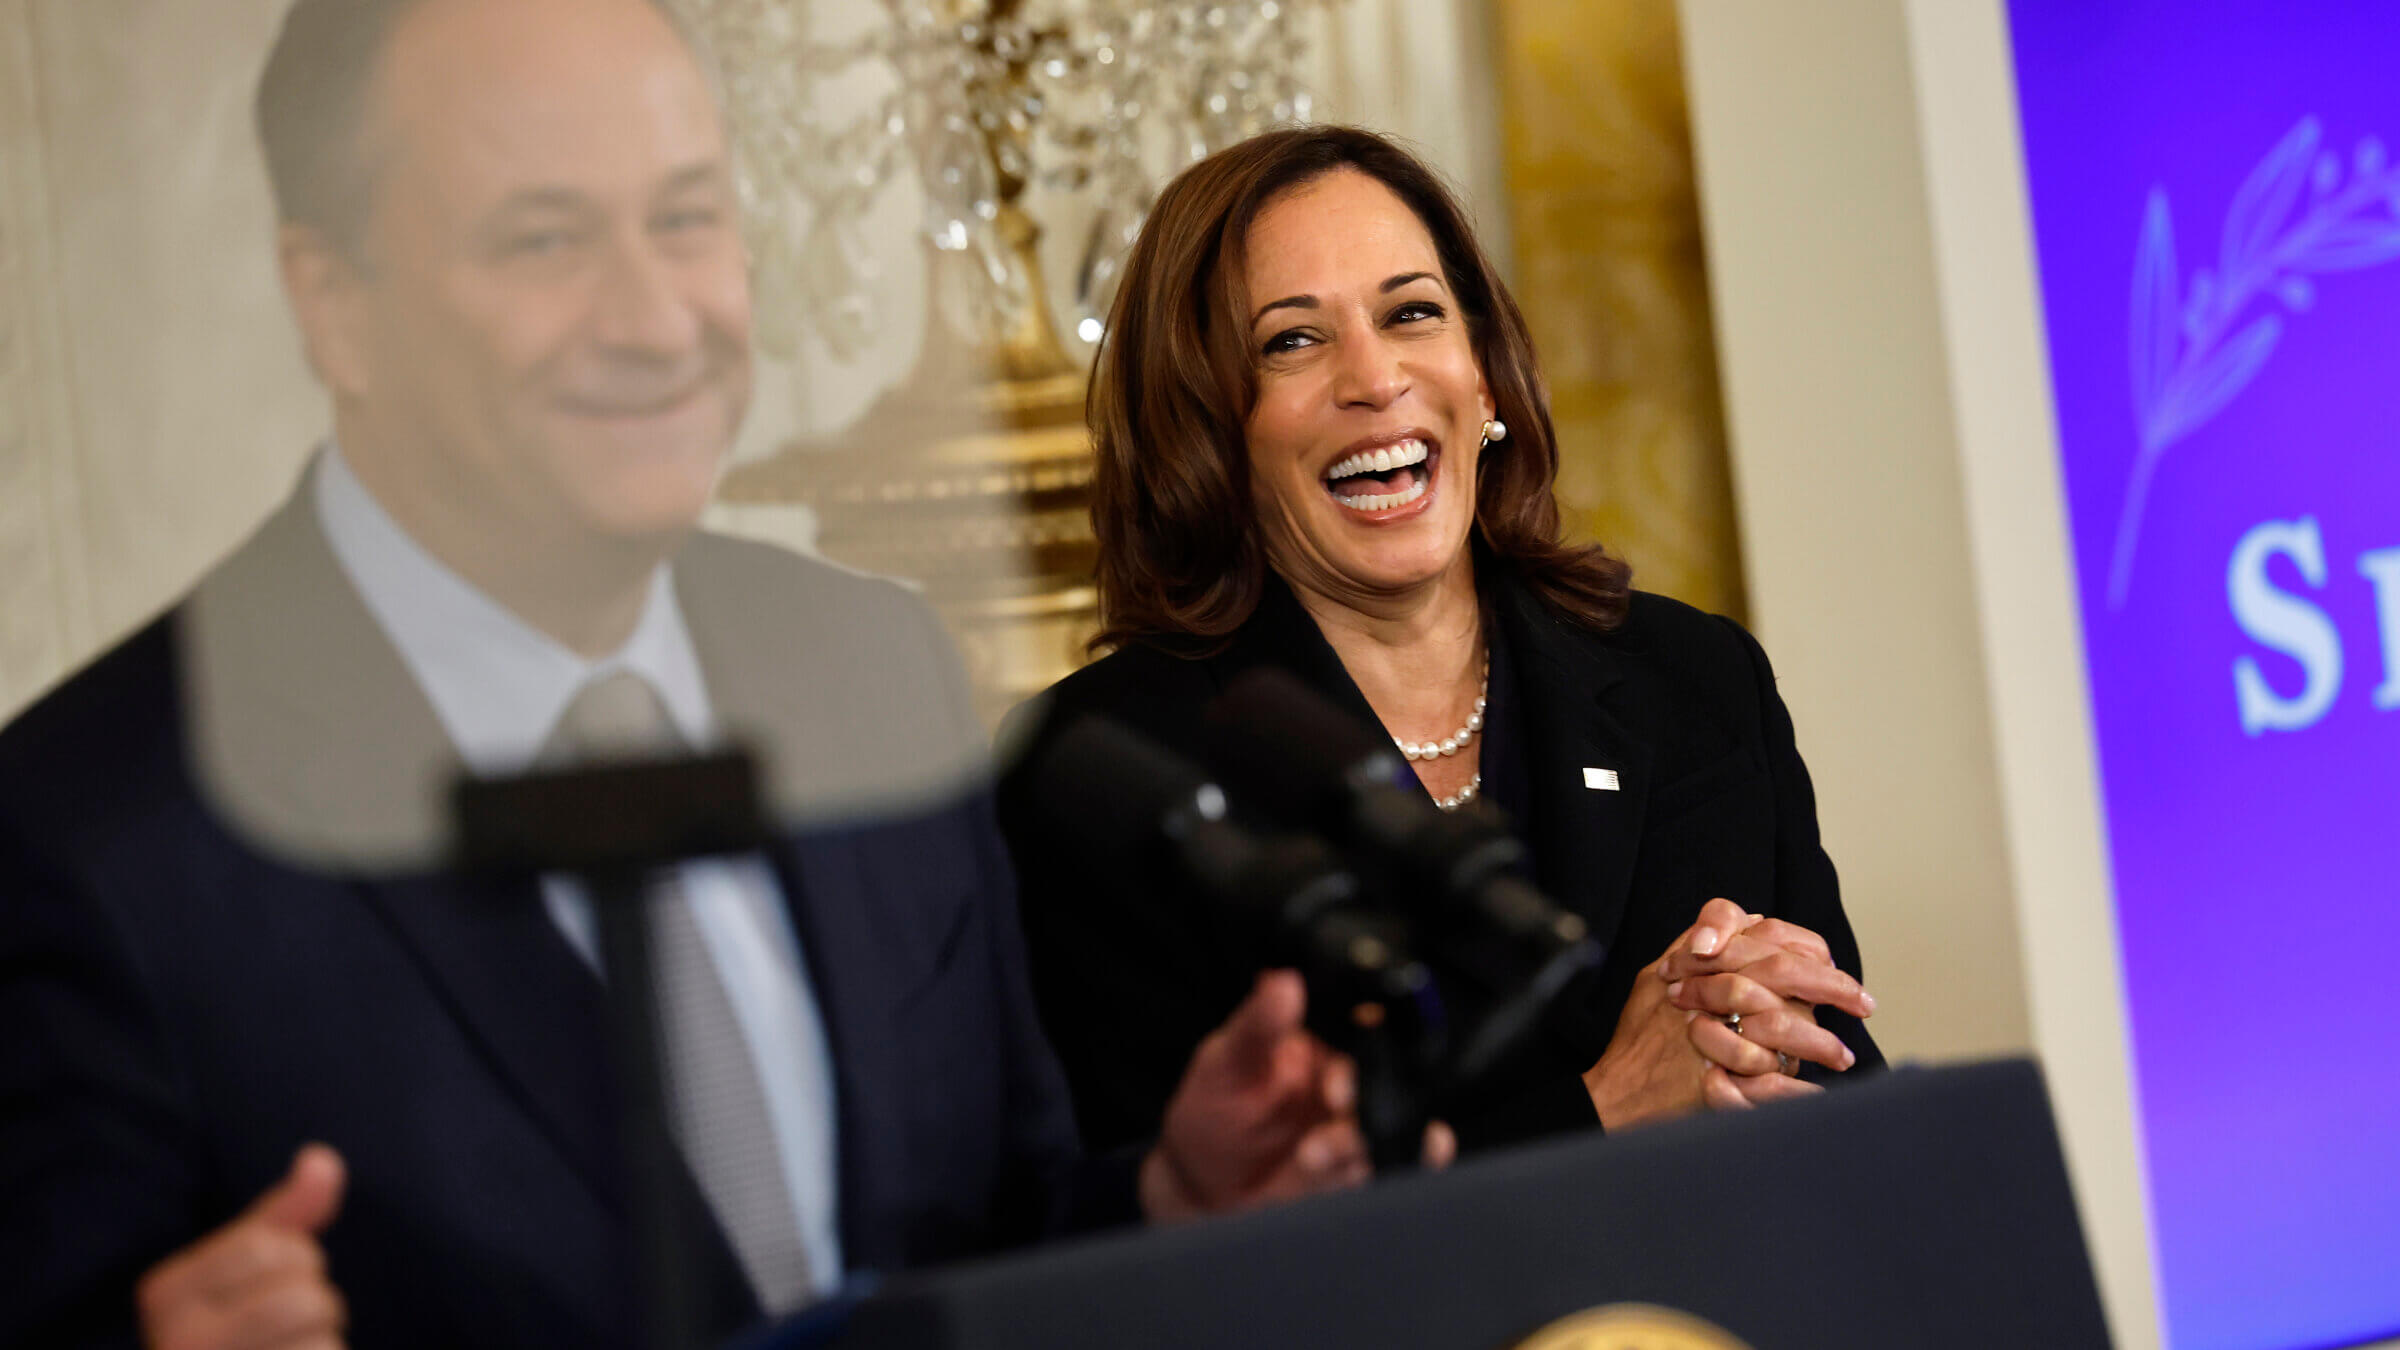 Vice President Kamala Harris with her husband, Doug Emhoff, at a Rosh Hashanah event. In contrast to President Joe Biden, Harris and Emhoff have been careful to avoid wading into controversies over antisemitism.